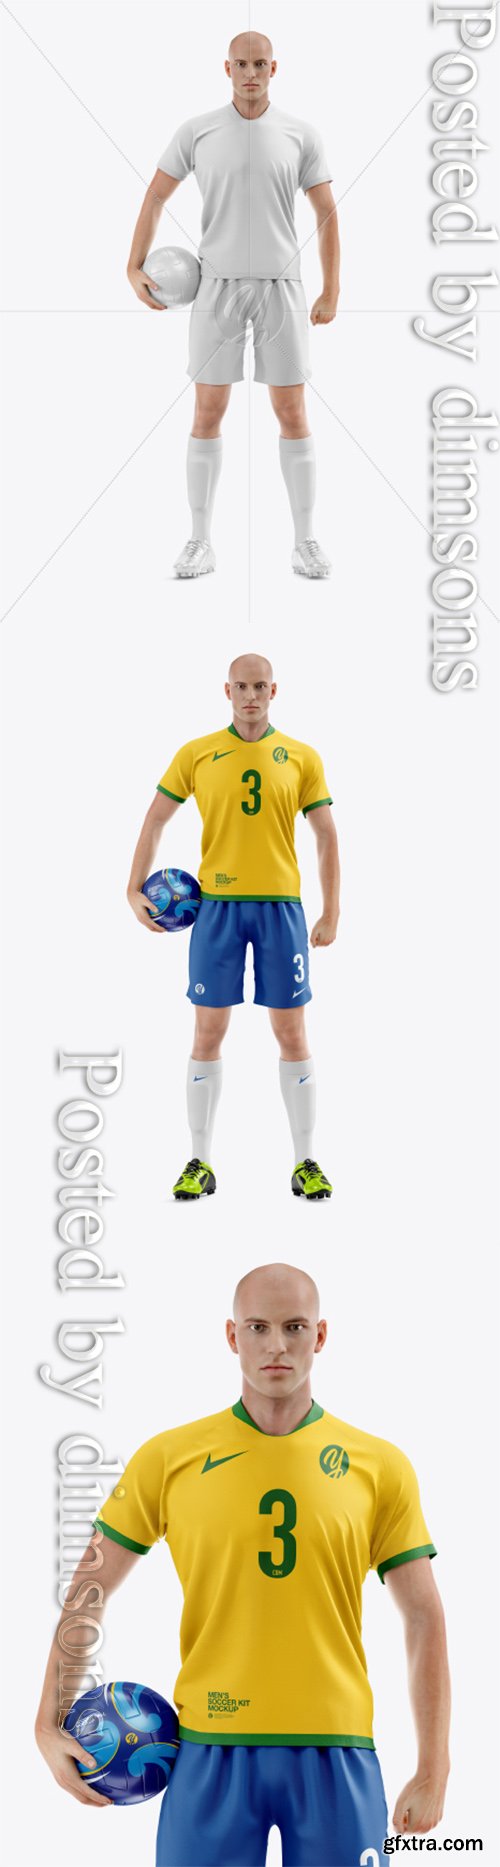 Soccer Player with Ball Mockup 41187